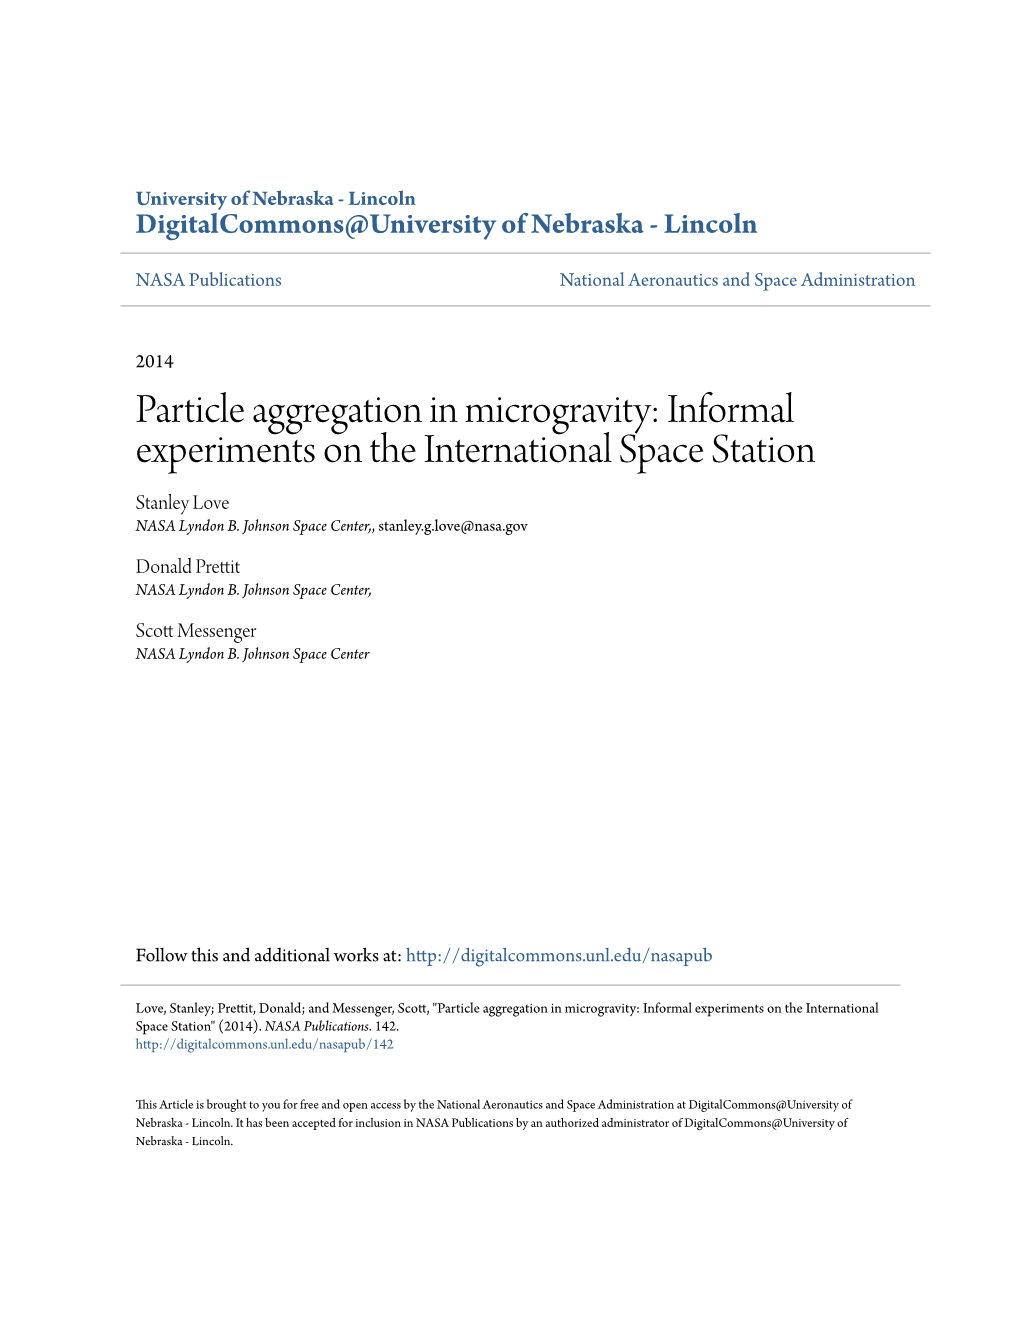 Particle Aggregation in Microgravity: Informal Experiments on the International Space Station Stanley Love NASA Lyndon B